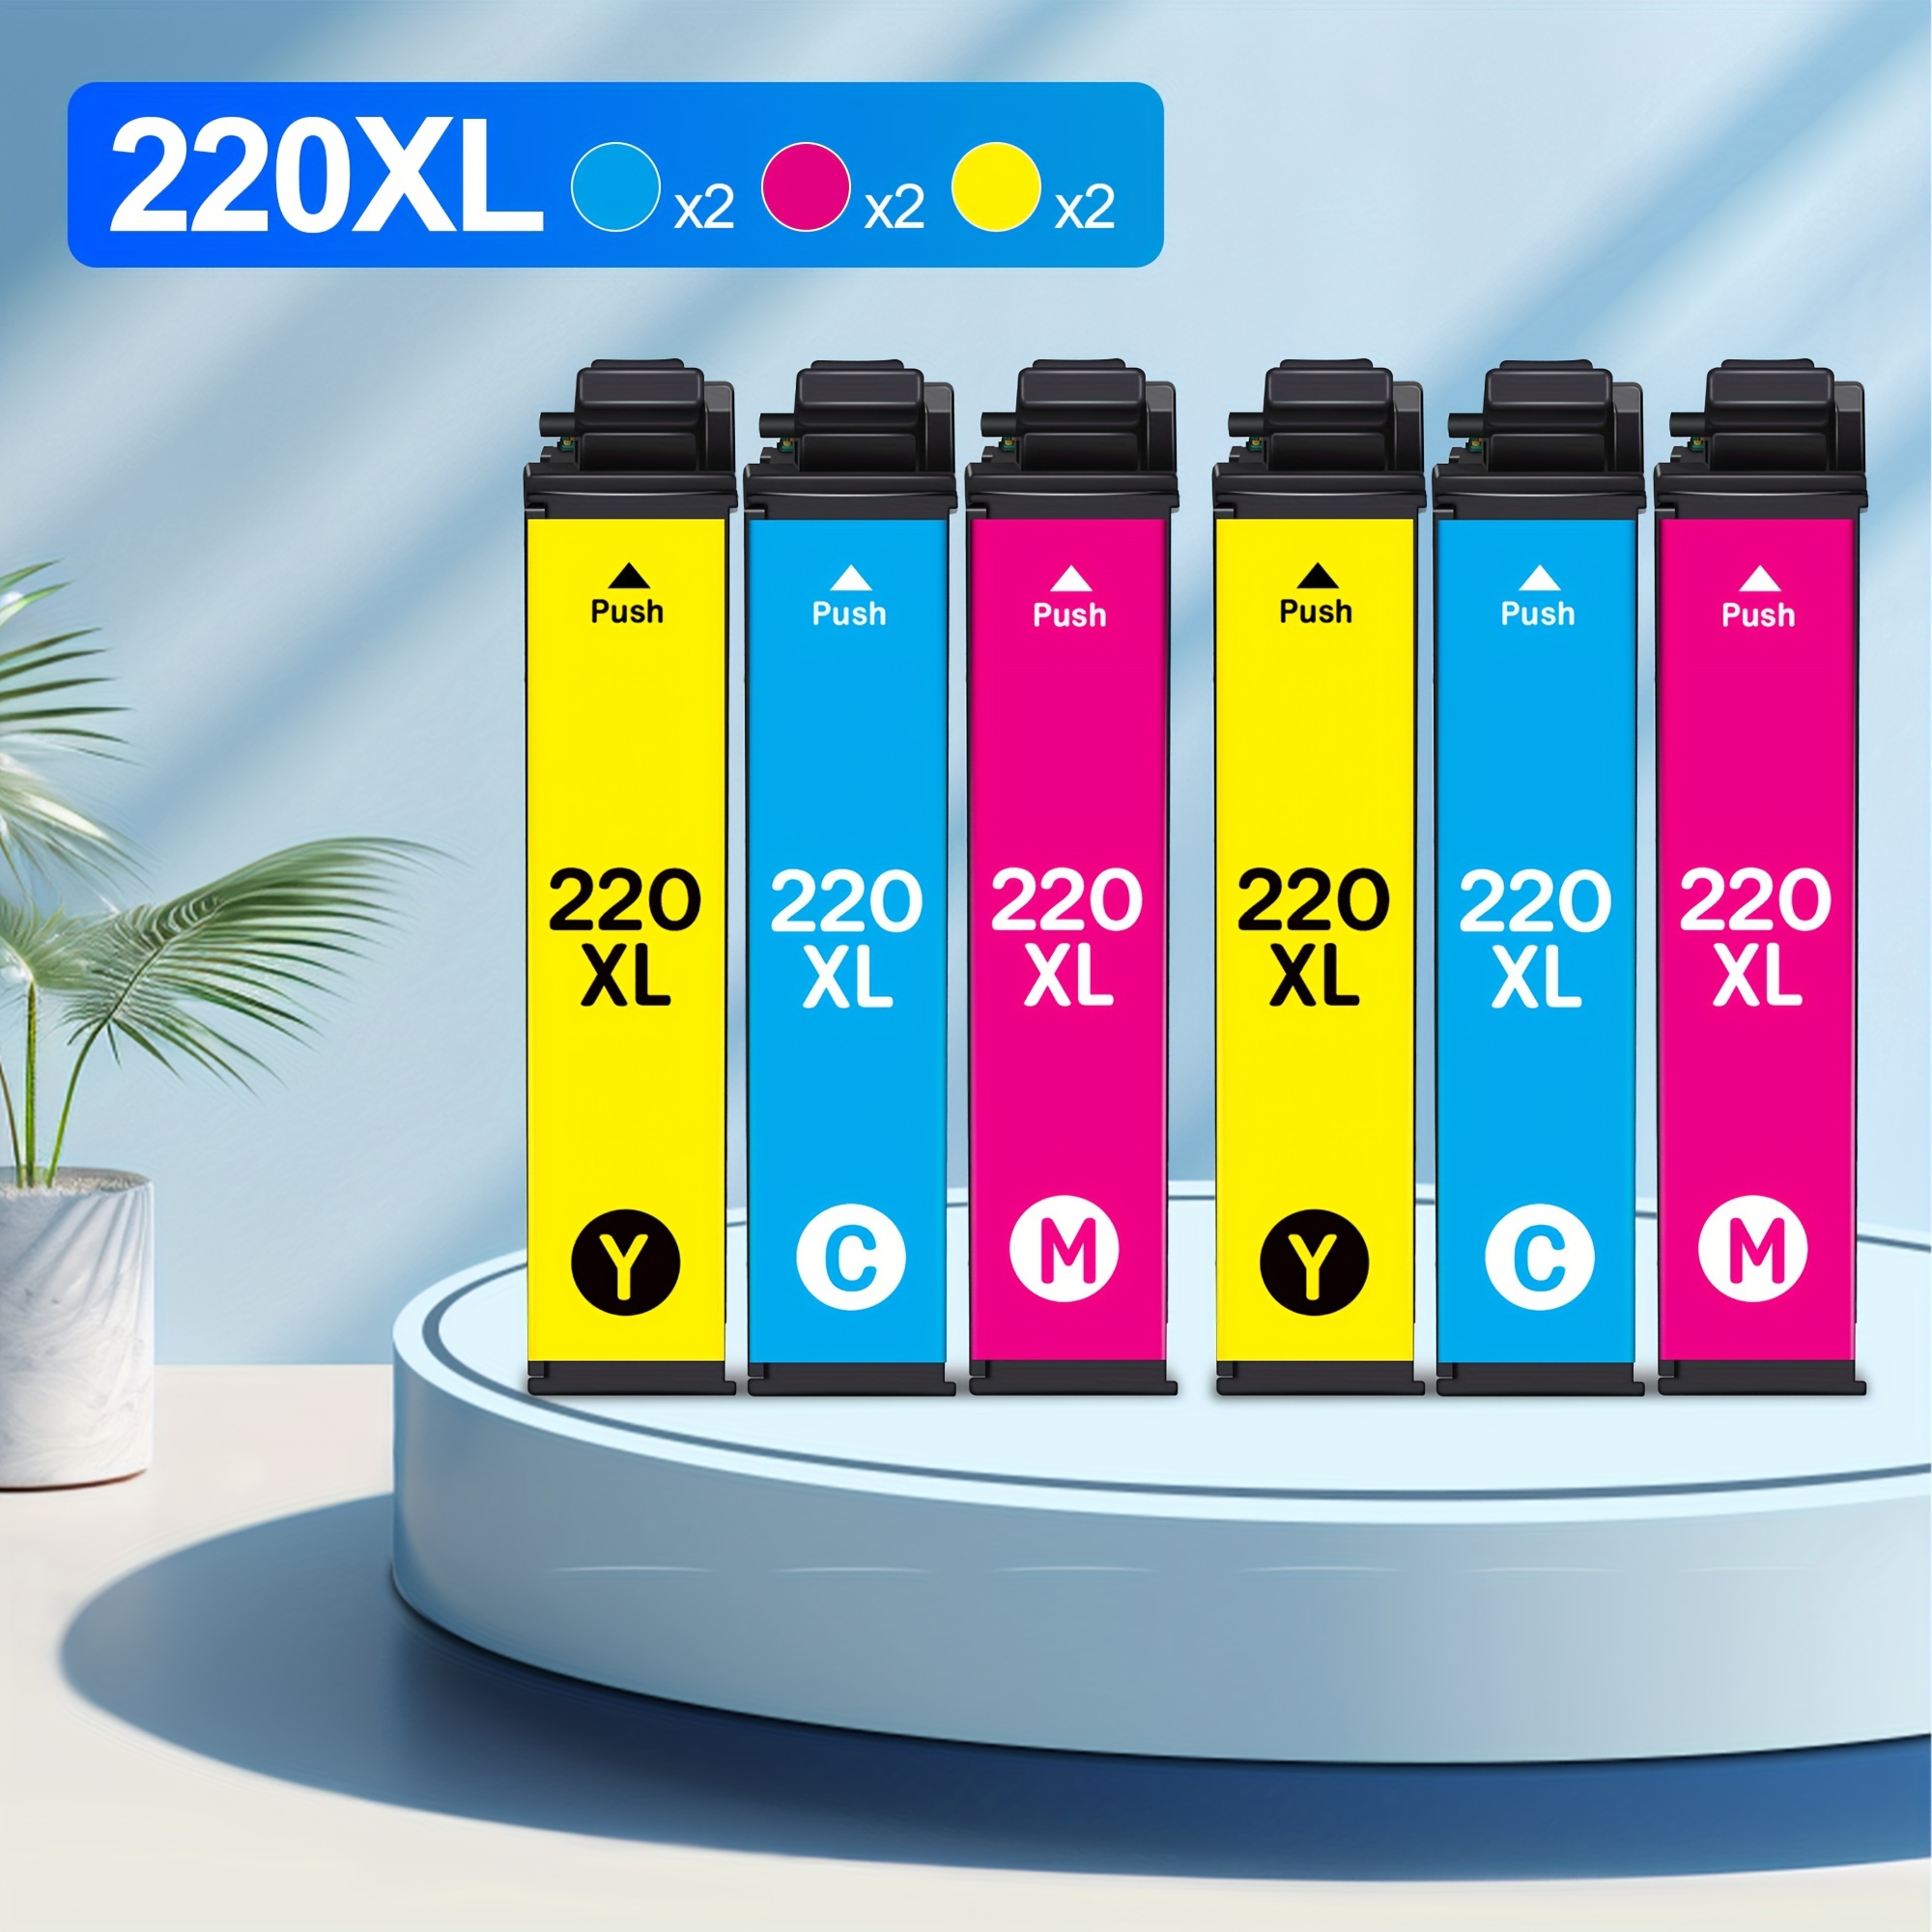 

6 Pack 220 Remanufactured 220xl Ink Cartridge Replacement For Epson 220 Xl Use For Workforce Wf-2750 Wf-2760 Wf-2630 Wf-2650 Wf-2660 Xp-320 Xp-420 Printer Tray (2 Cyan 2 Magenta 2 Yellow)